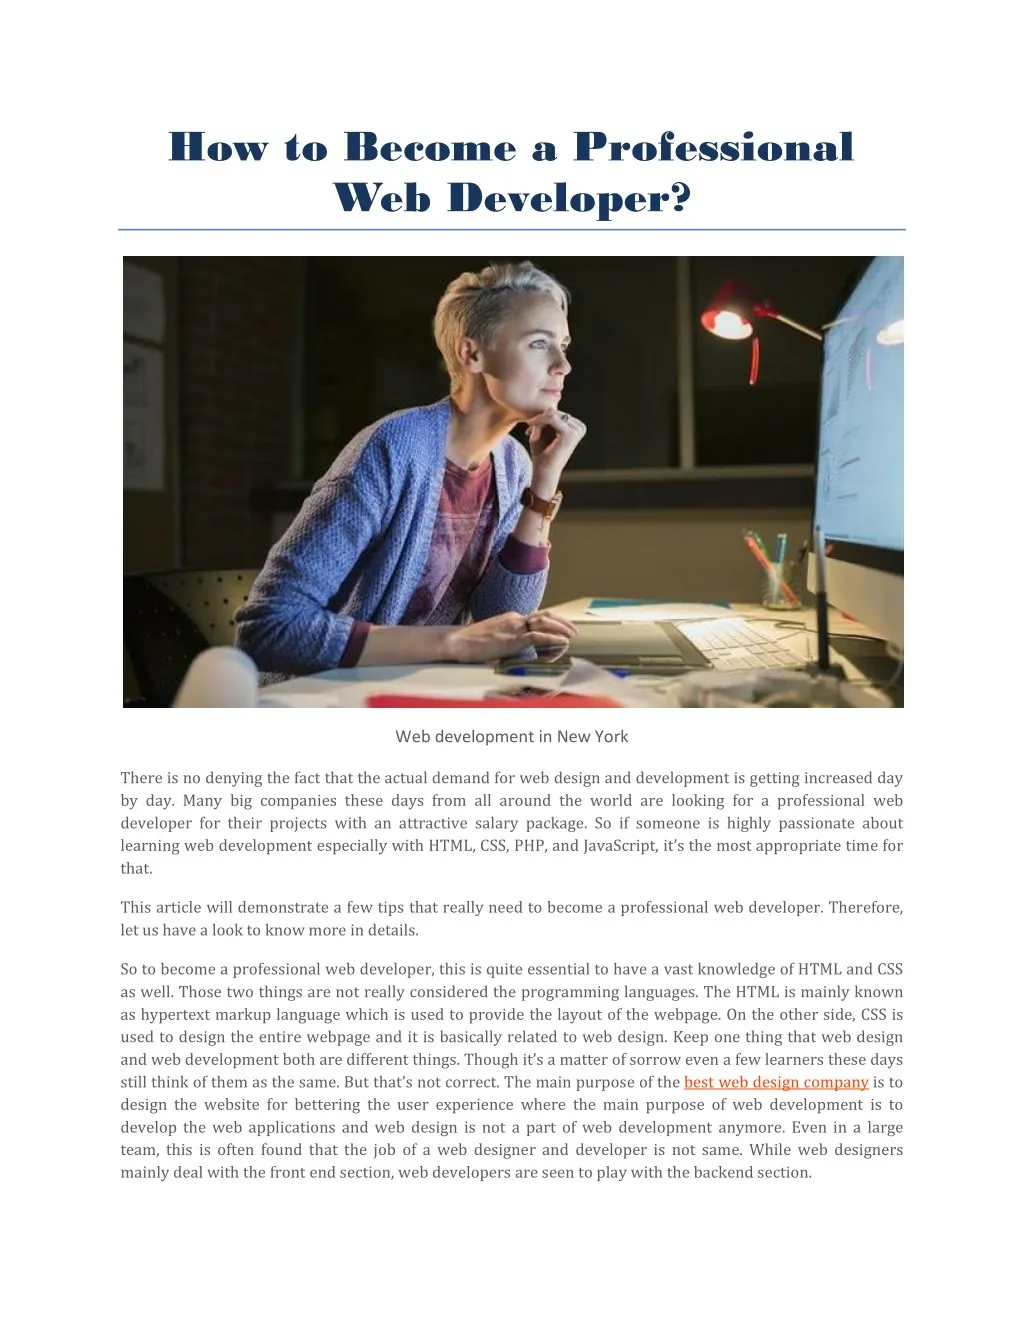 how to become a professional web developer